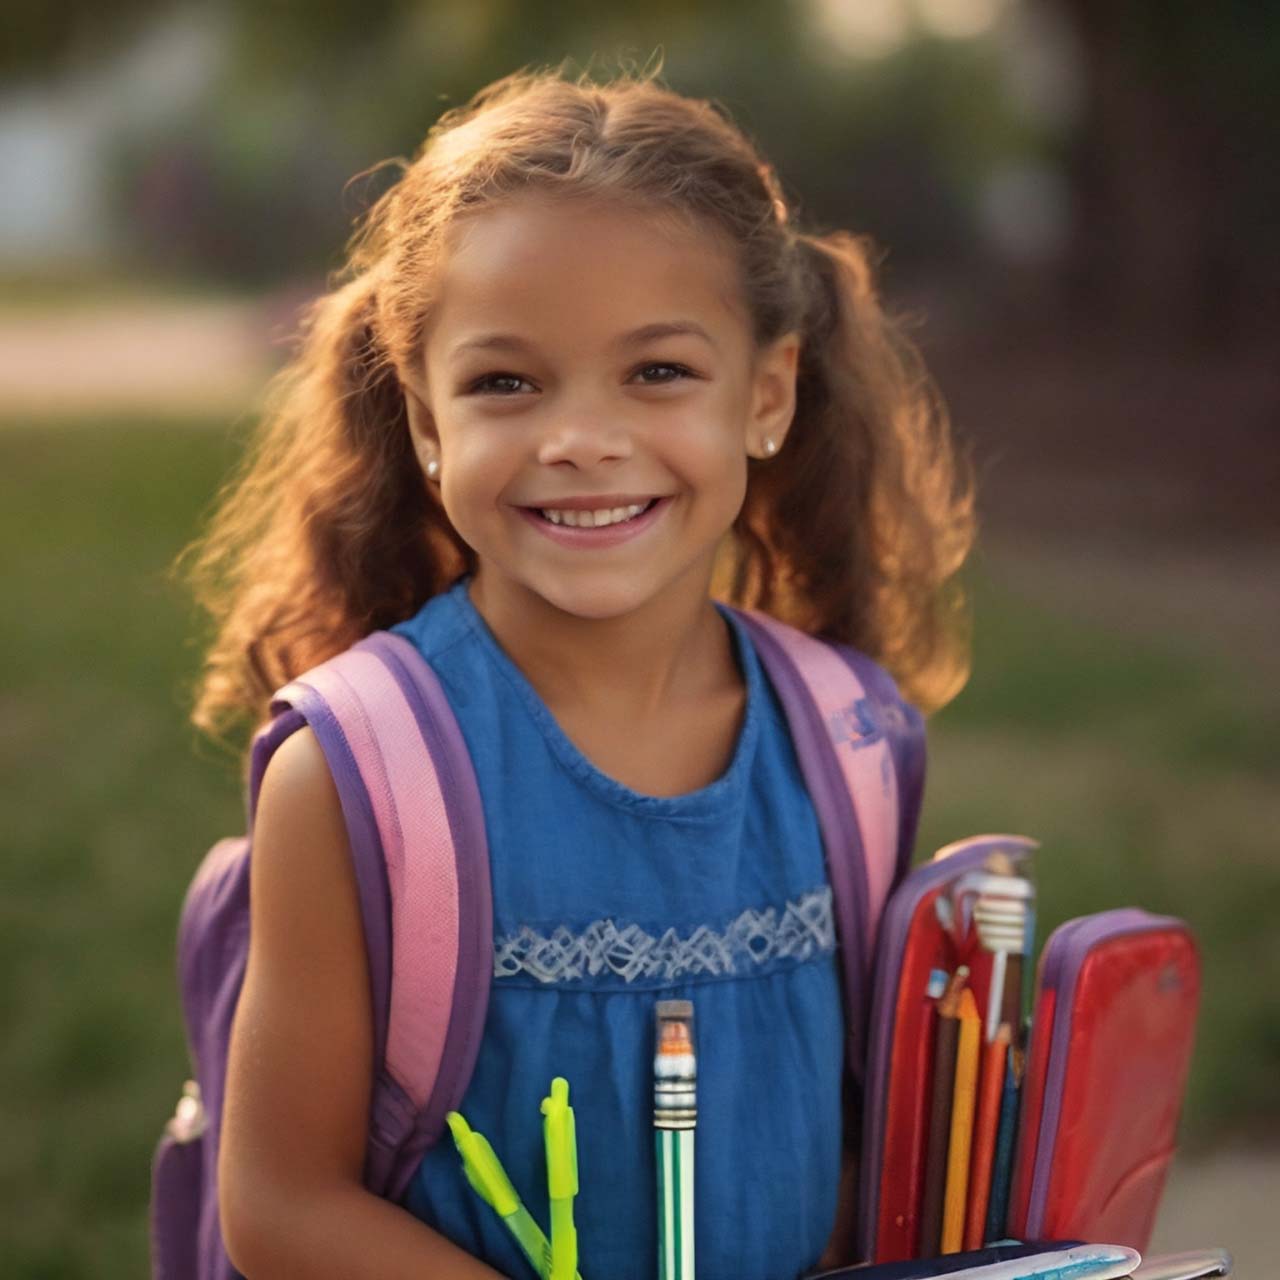 Smiling first grade student on first day of school carrying school supplies.